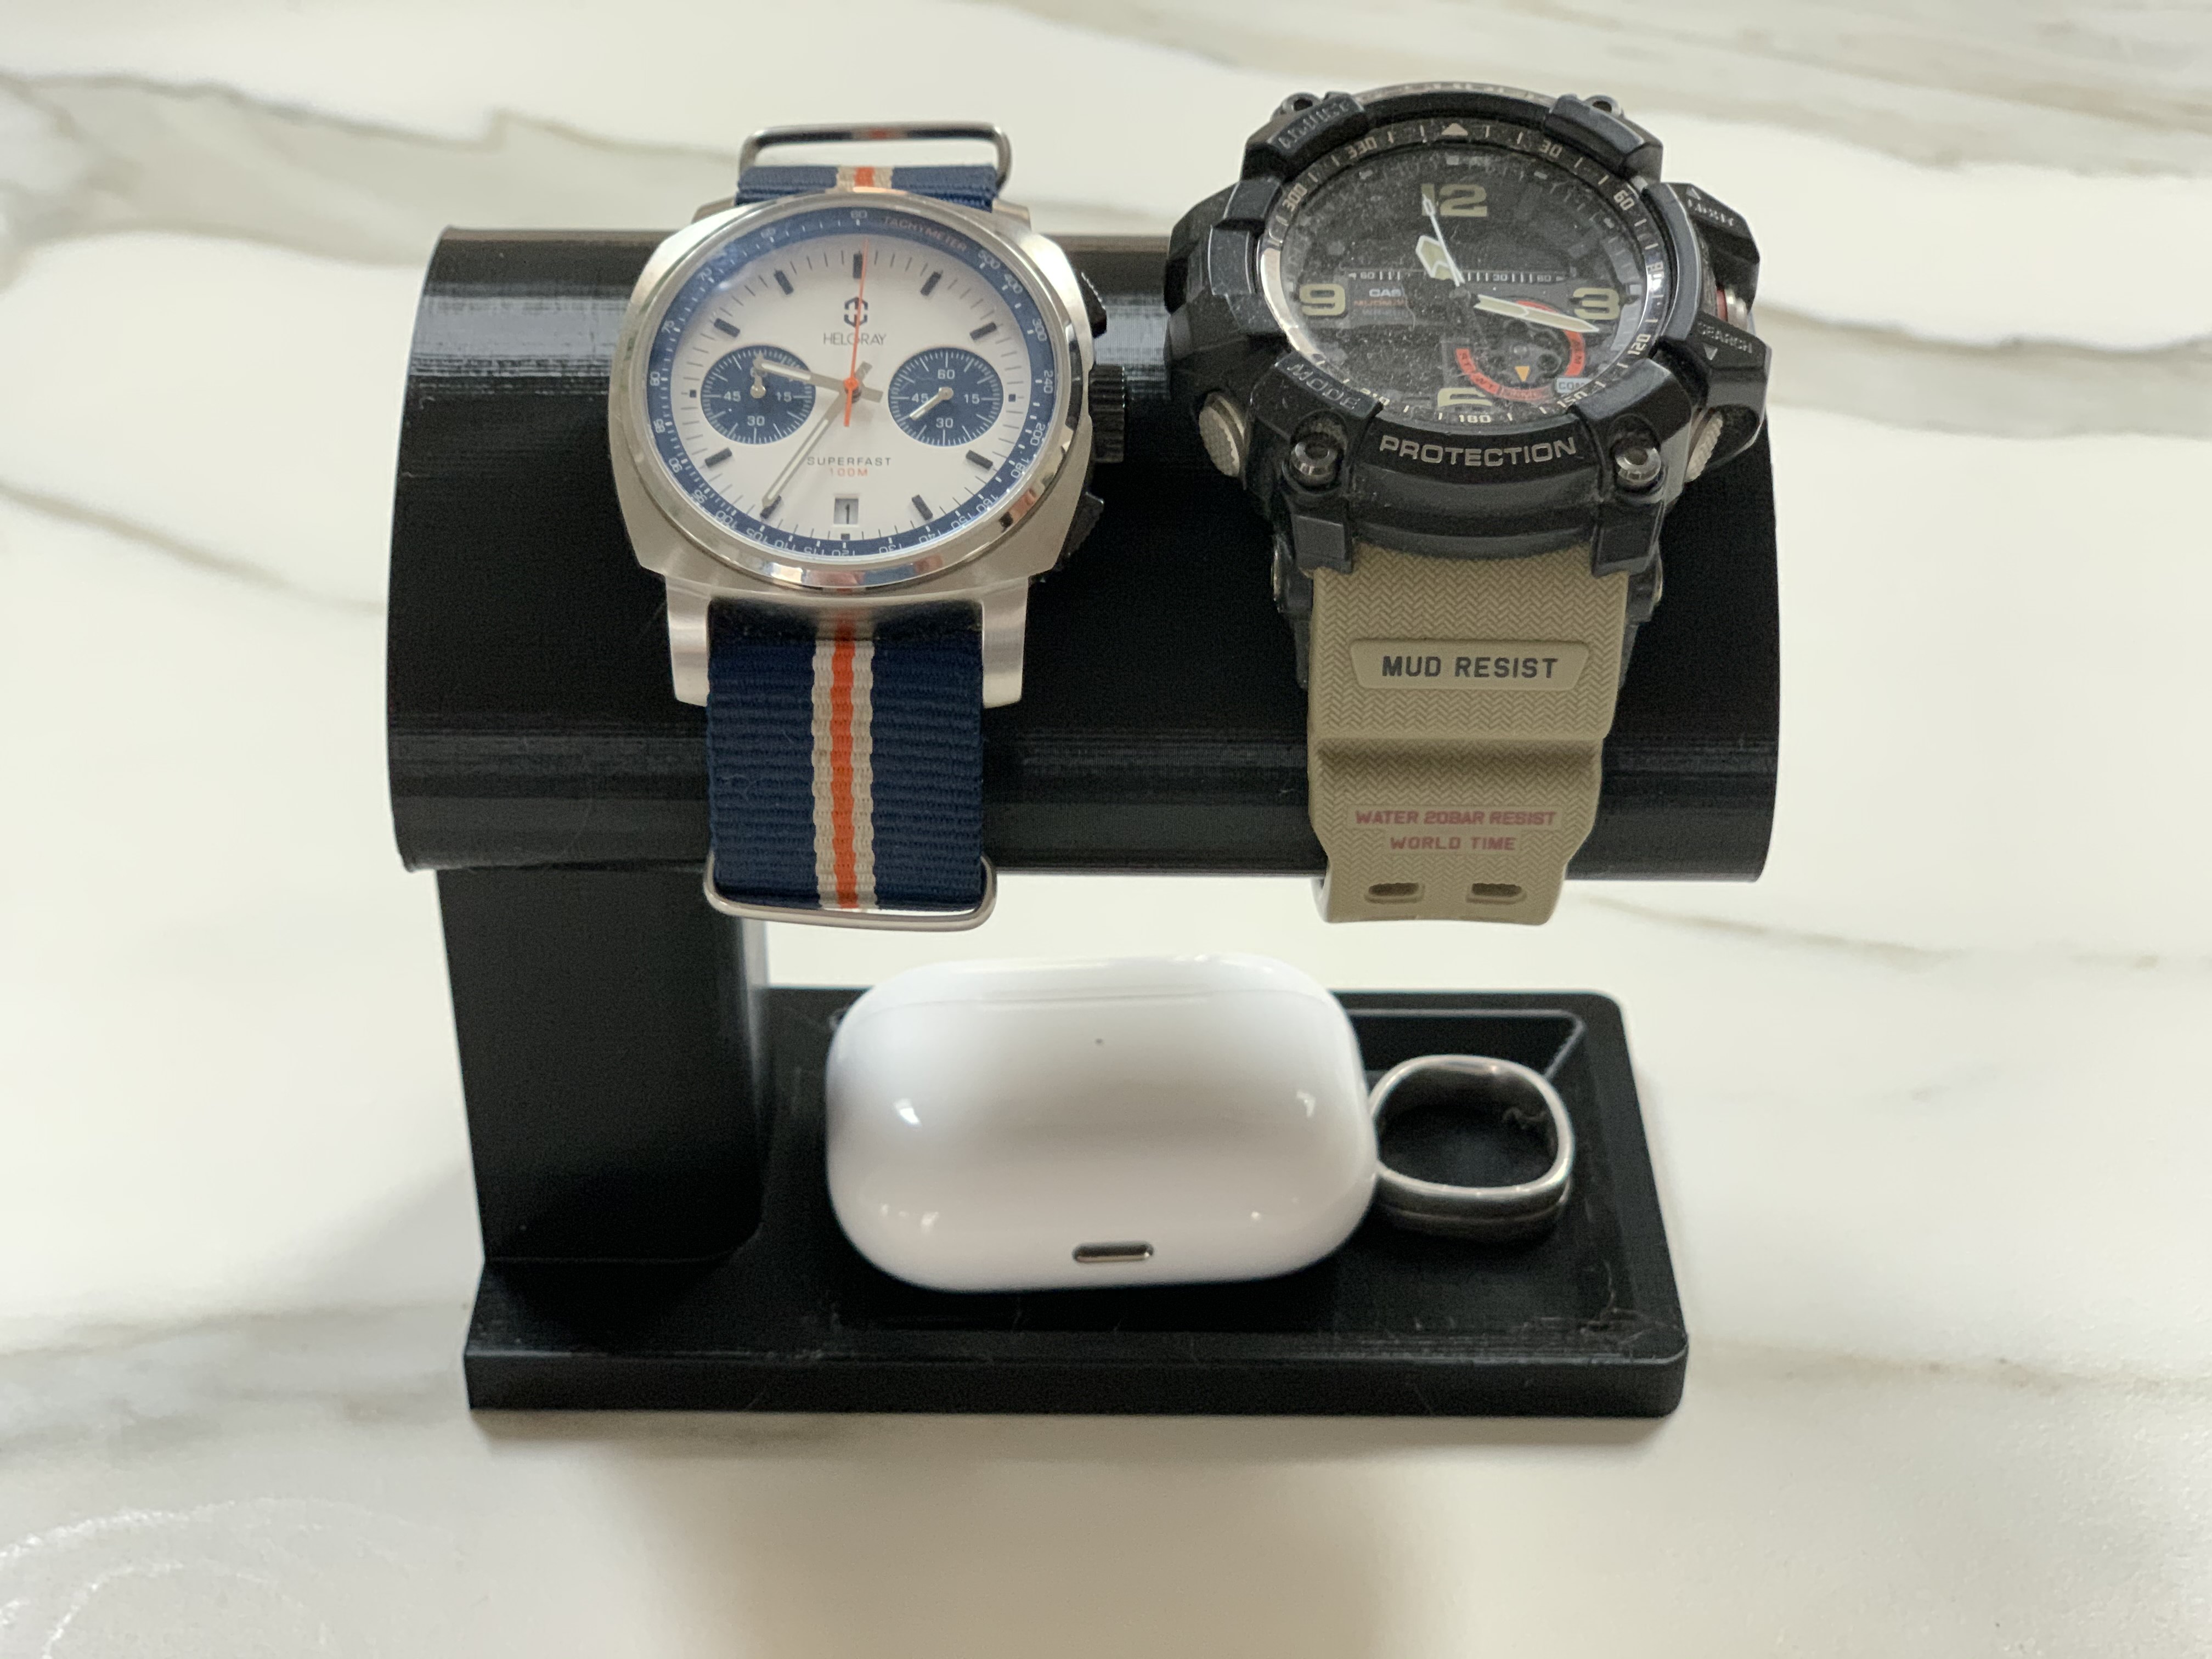 Watch stand w/ valet tray